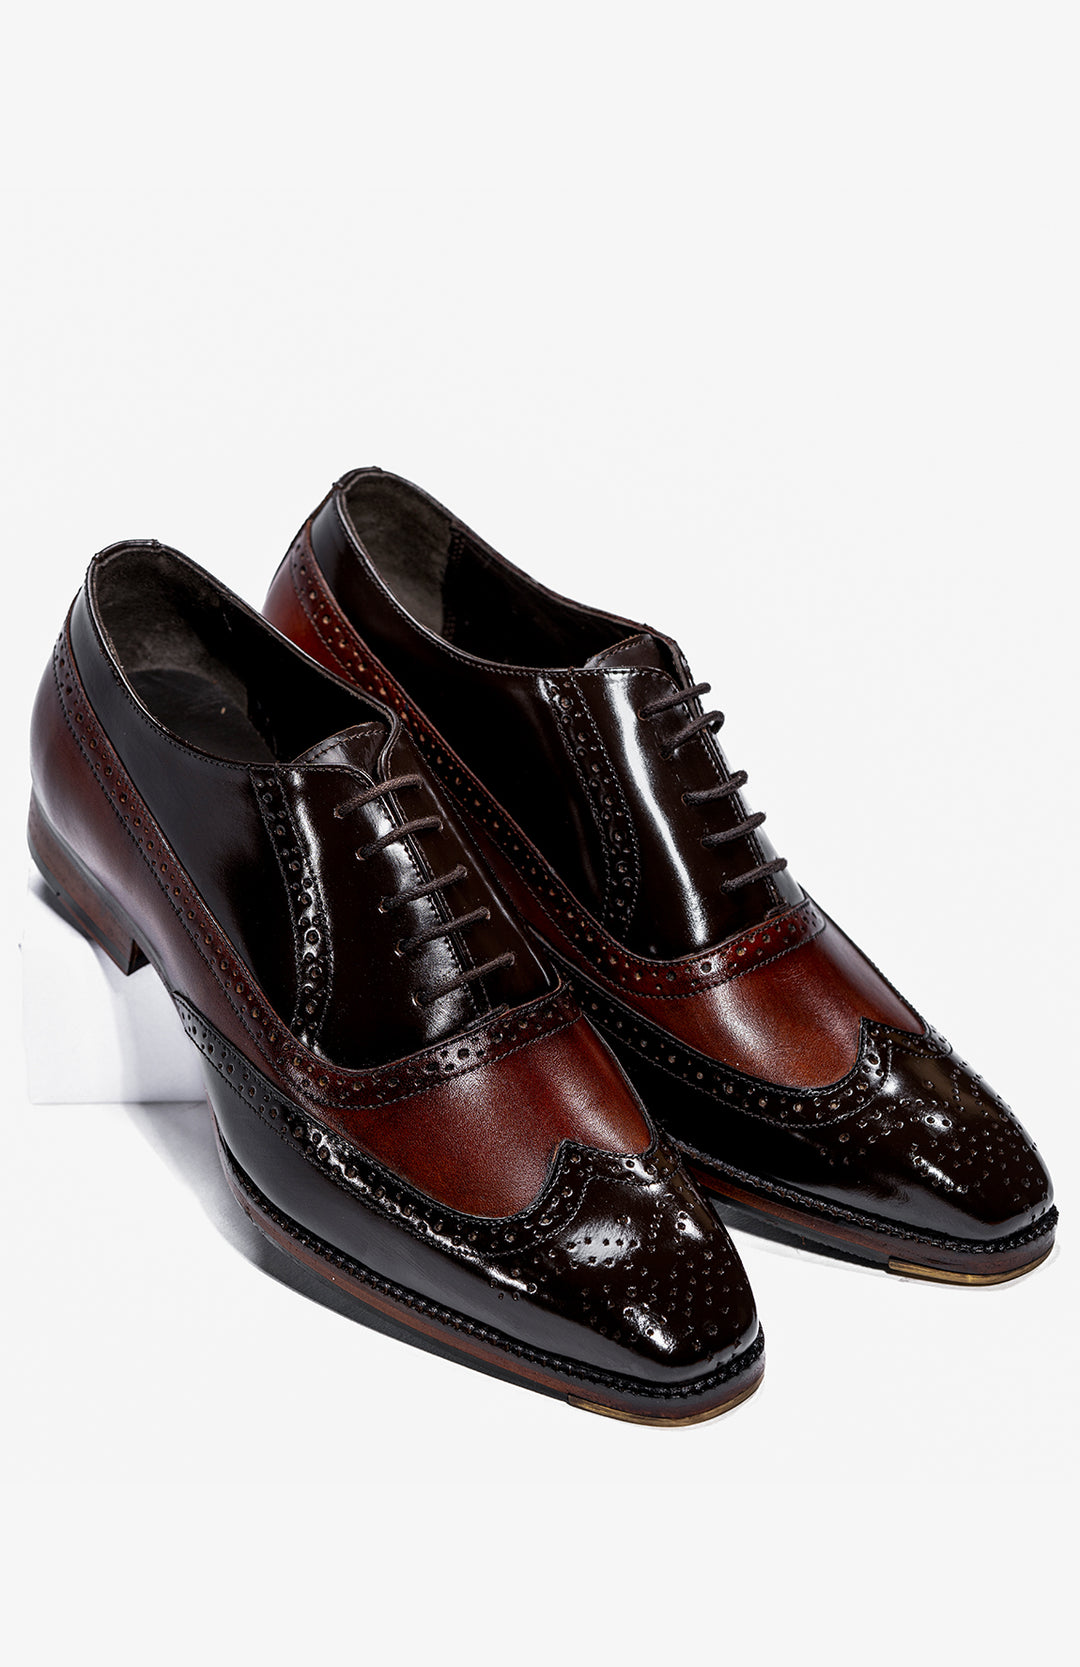 LONGWING BROGUE LACE-UP SHOES